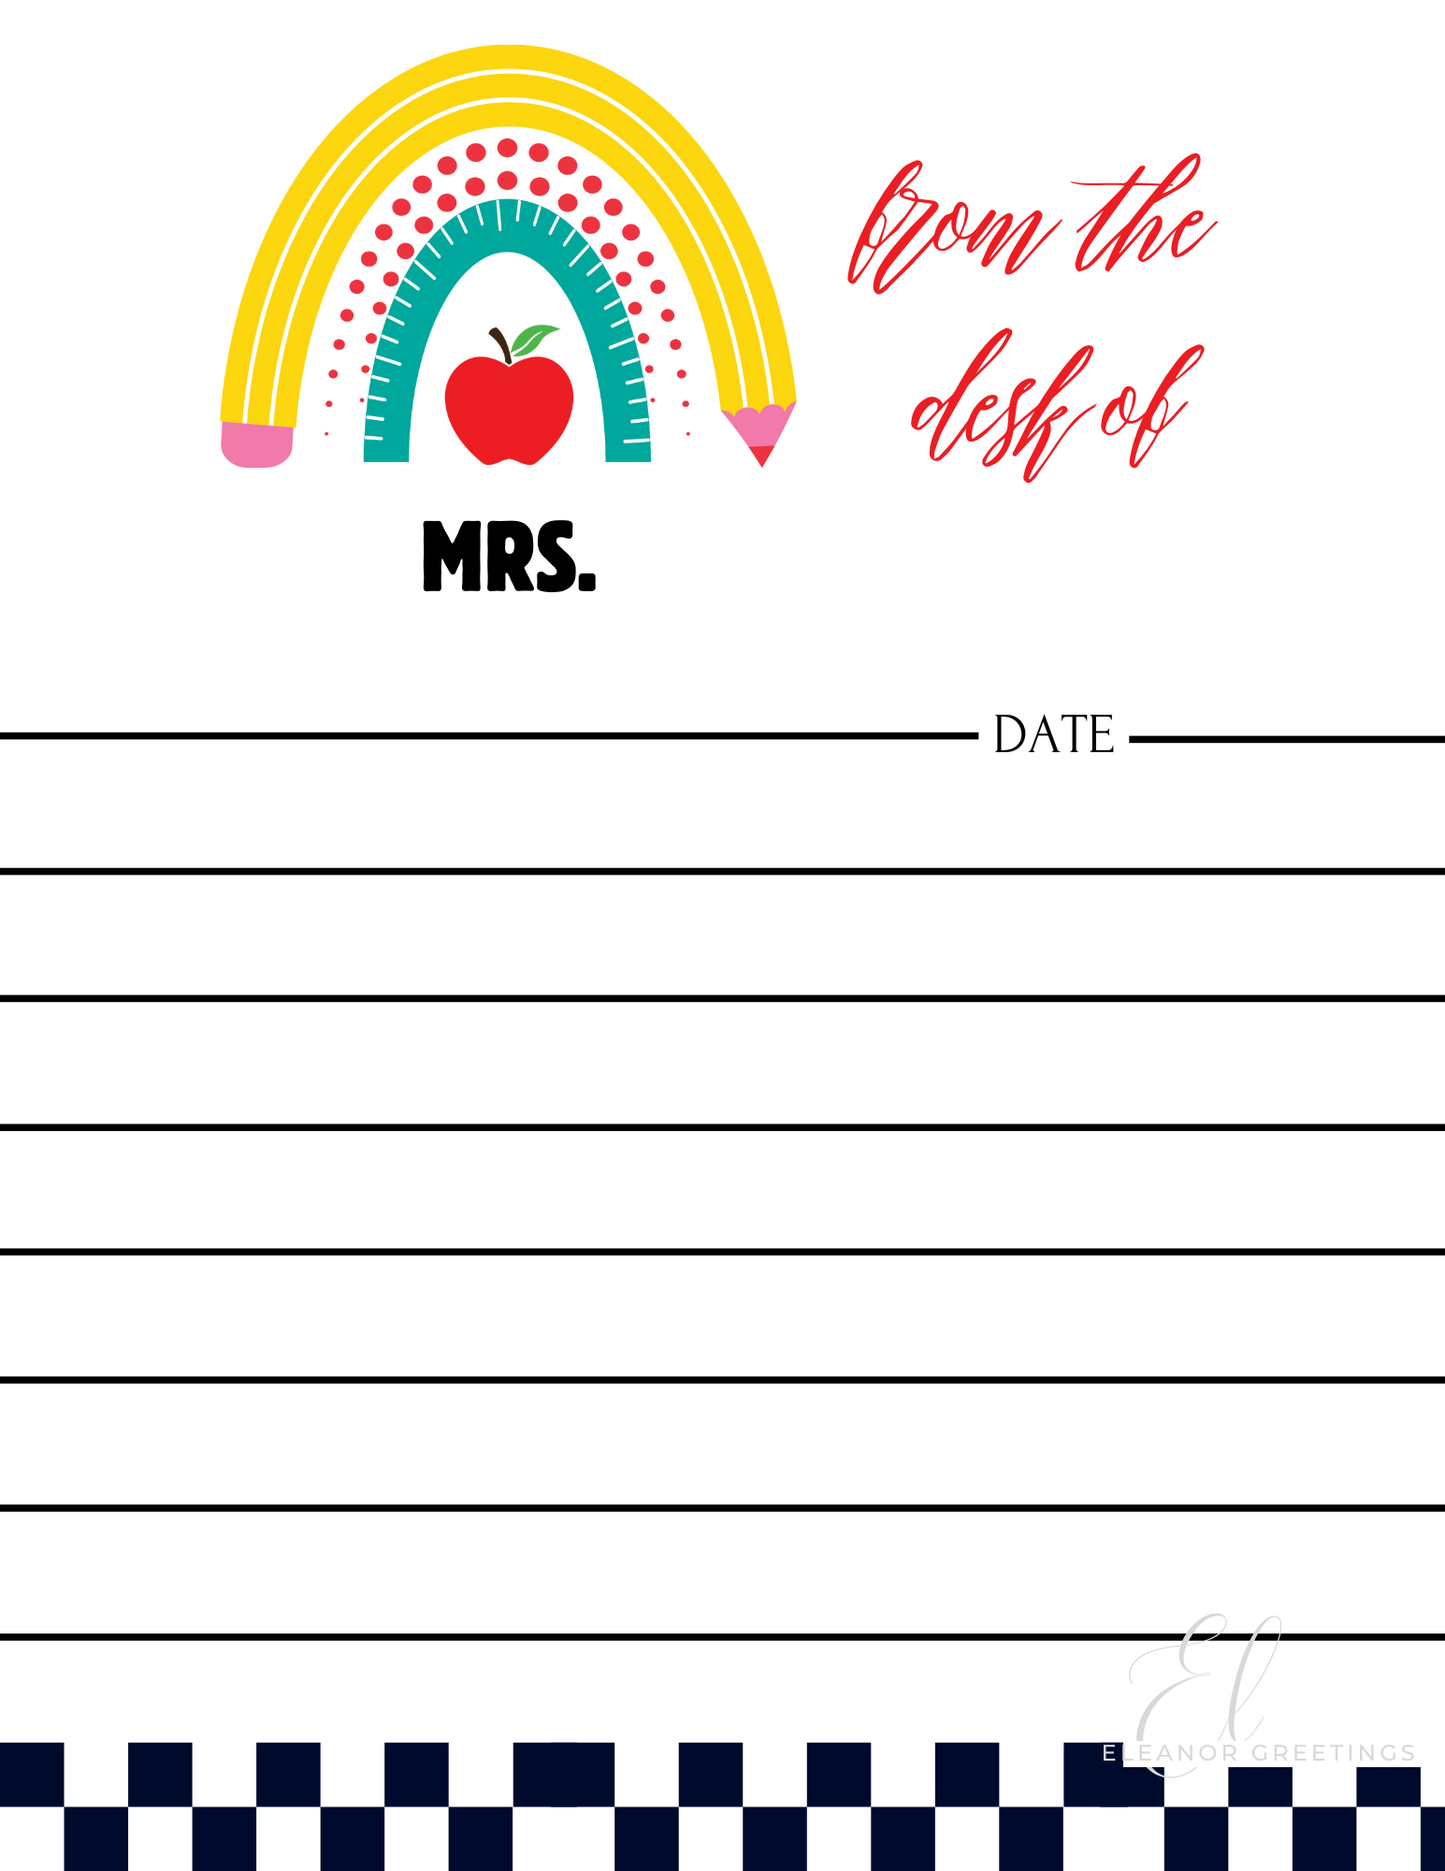 Ms./Mrs. from the Desk of Letterhead